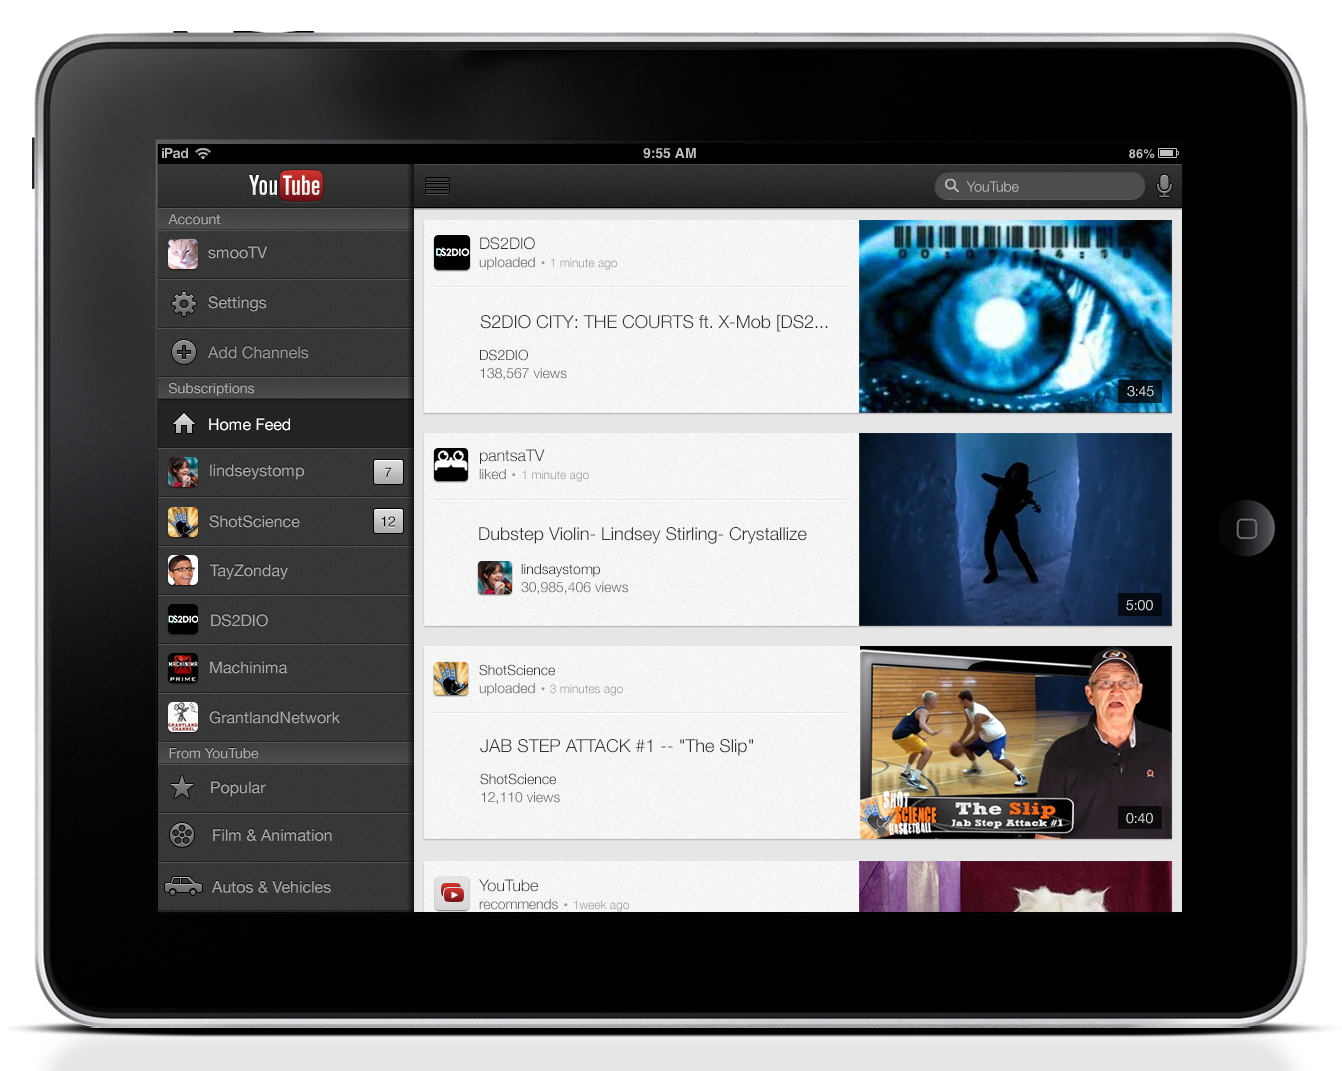 YouTube Updates iOS App With iPad Support, AirPlay, and Performance Improvements